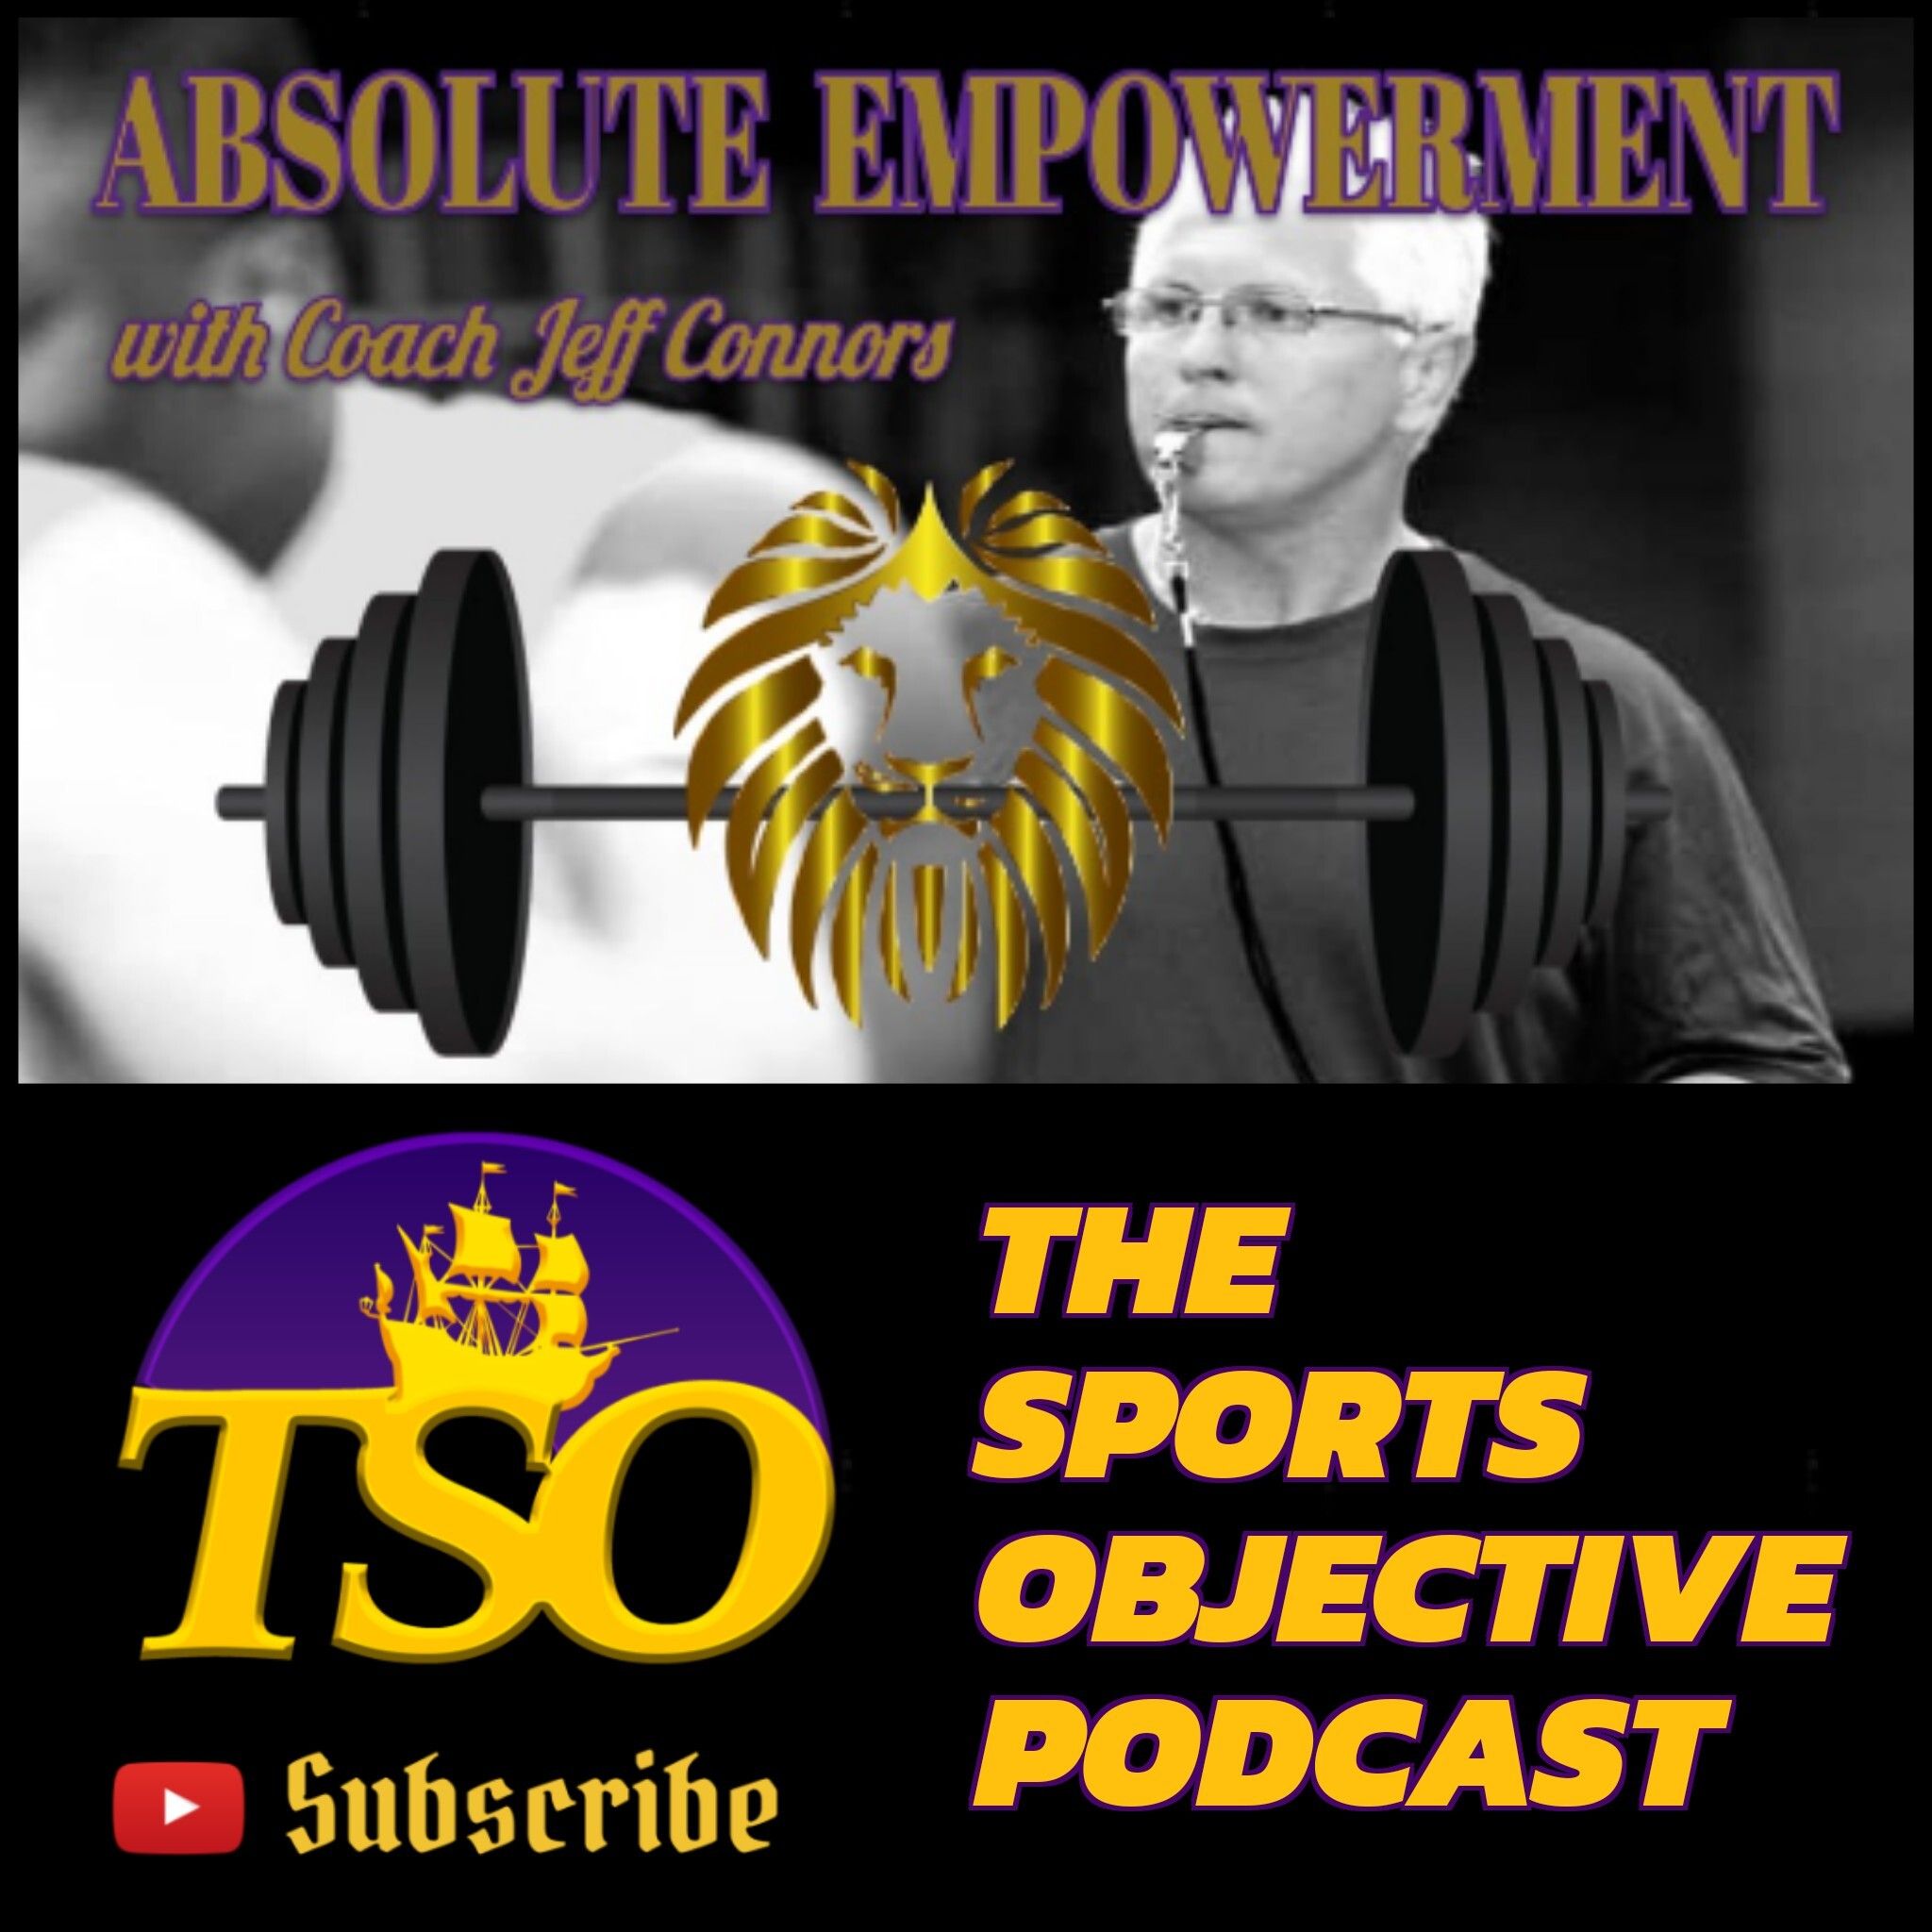 S6 Ep954: ABSOLUTE EMPOWERMENT WITH COACH JEFF CONNORS: UDON CHEEK, ECU TRACK